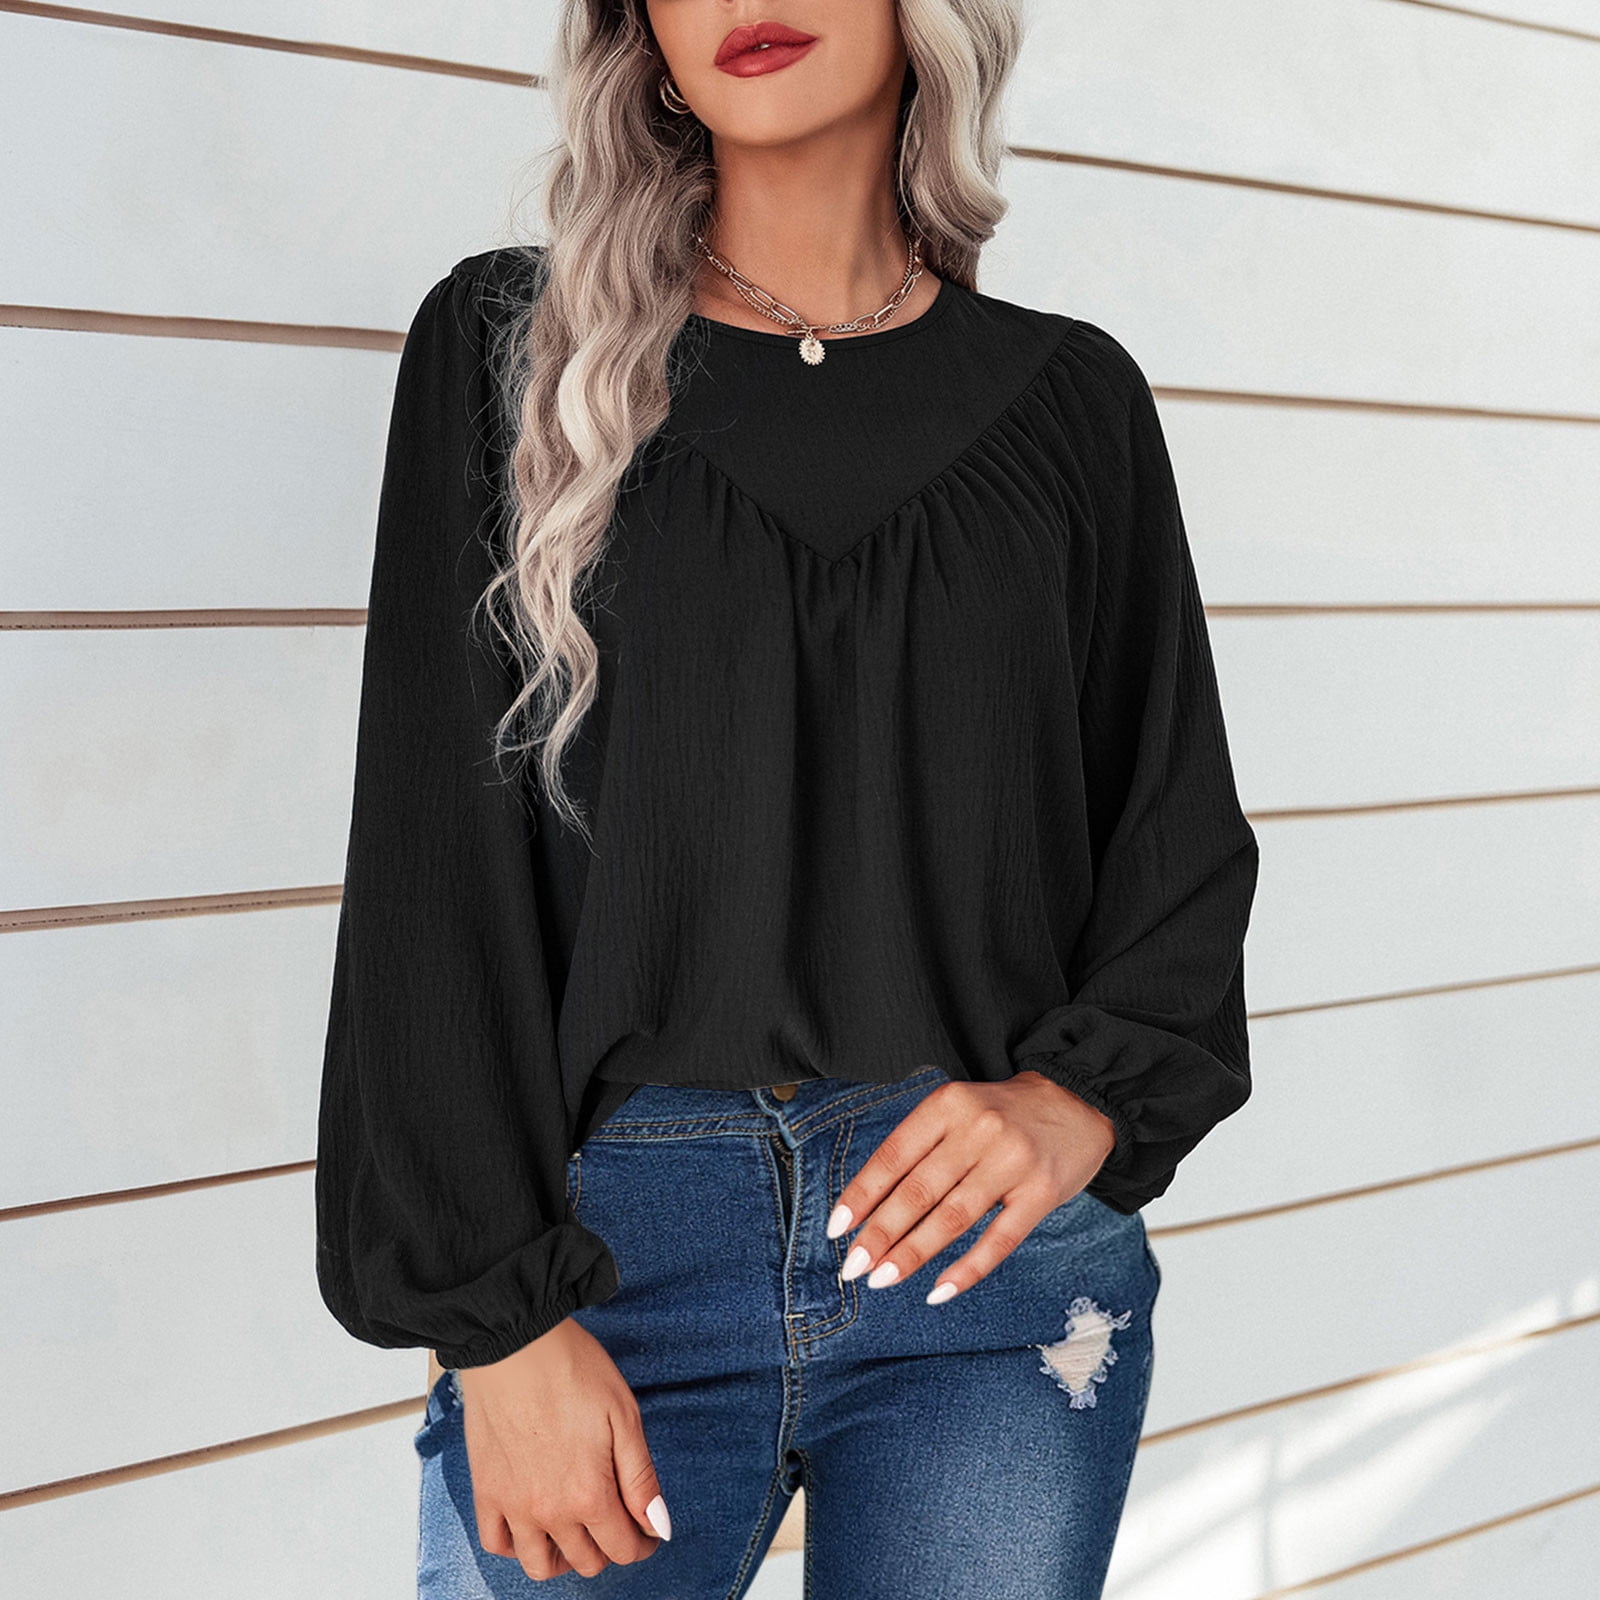 Women Long Sleeve Tops Plain Round Neck T Shirt Solid Patchwork Lantern  Sleeve Casual Loose Blouses & Shirts Ladies Autumn Dressy Tops Size 8-16